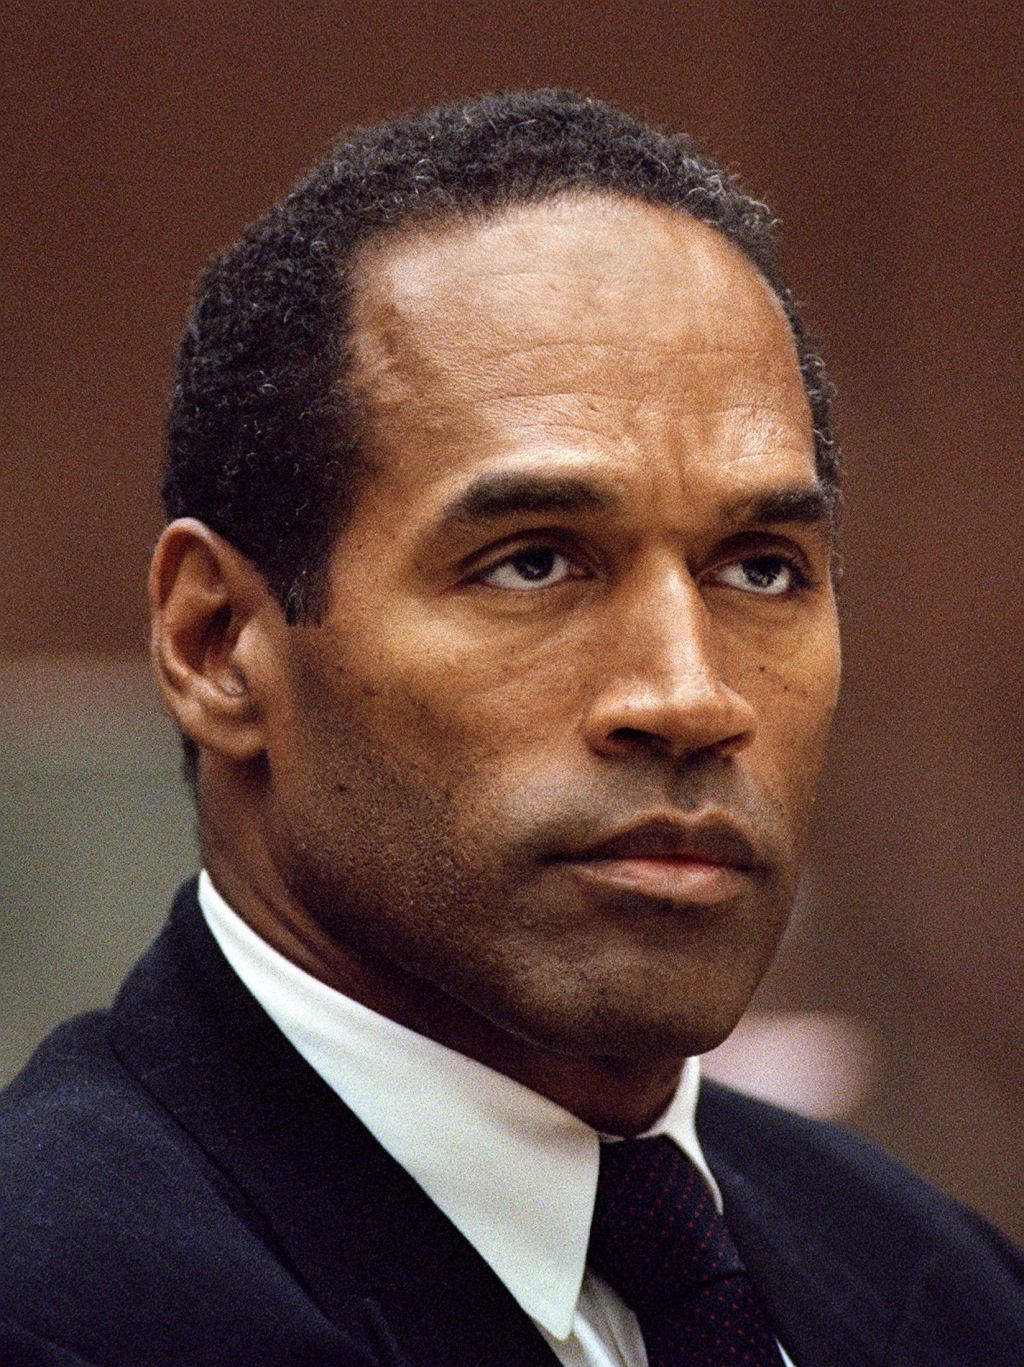 A photograph dated 29 September 1994 of O.J. Simps